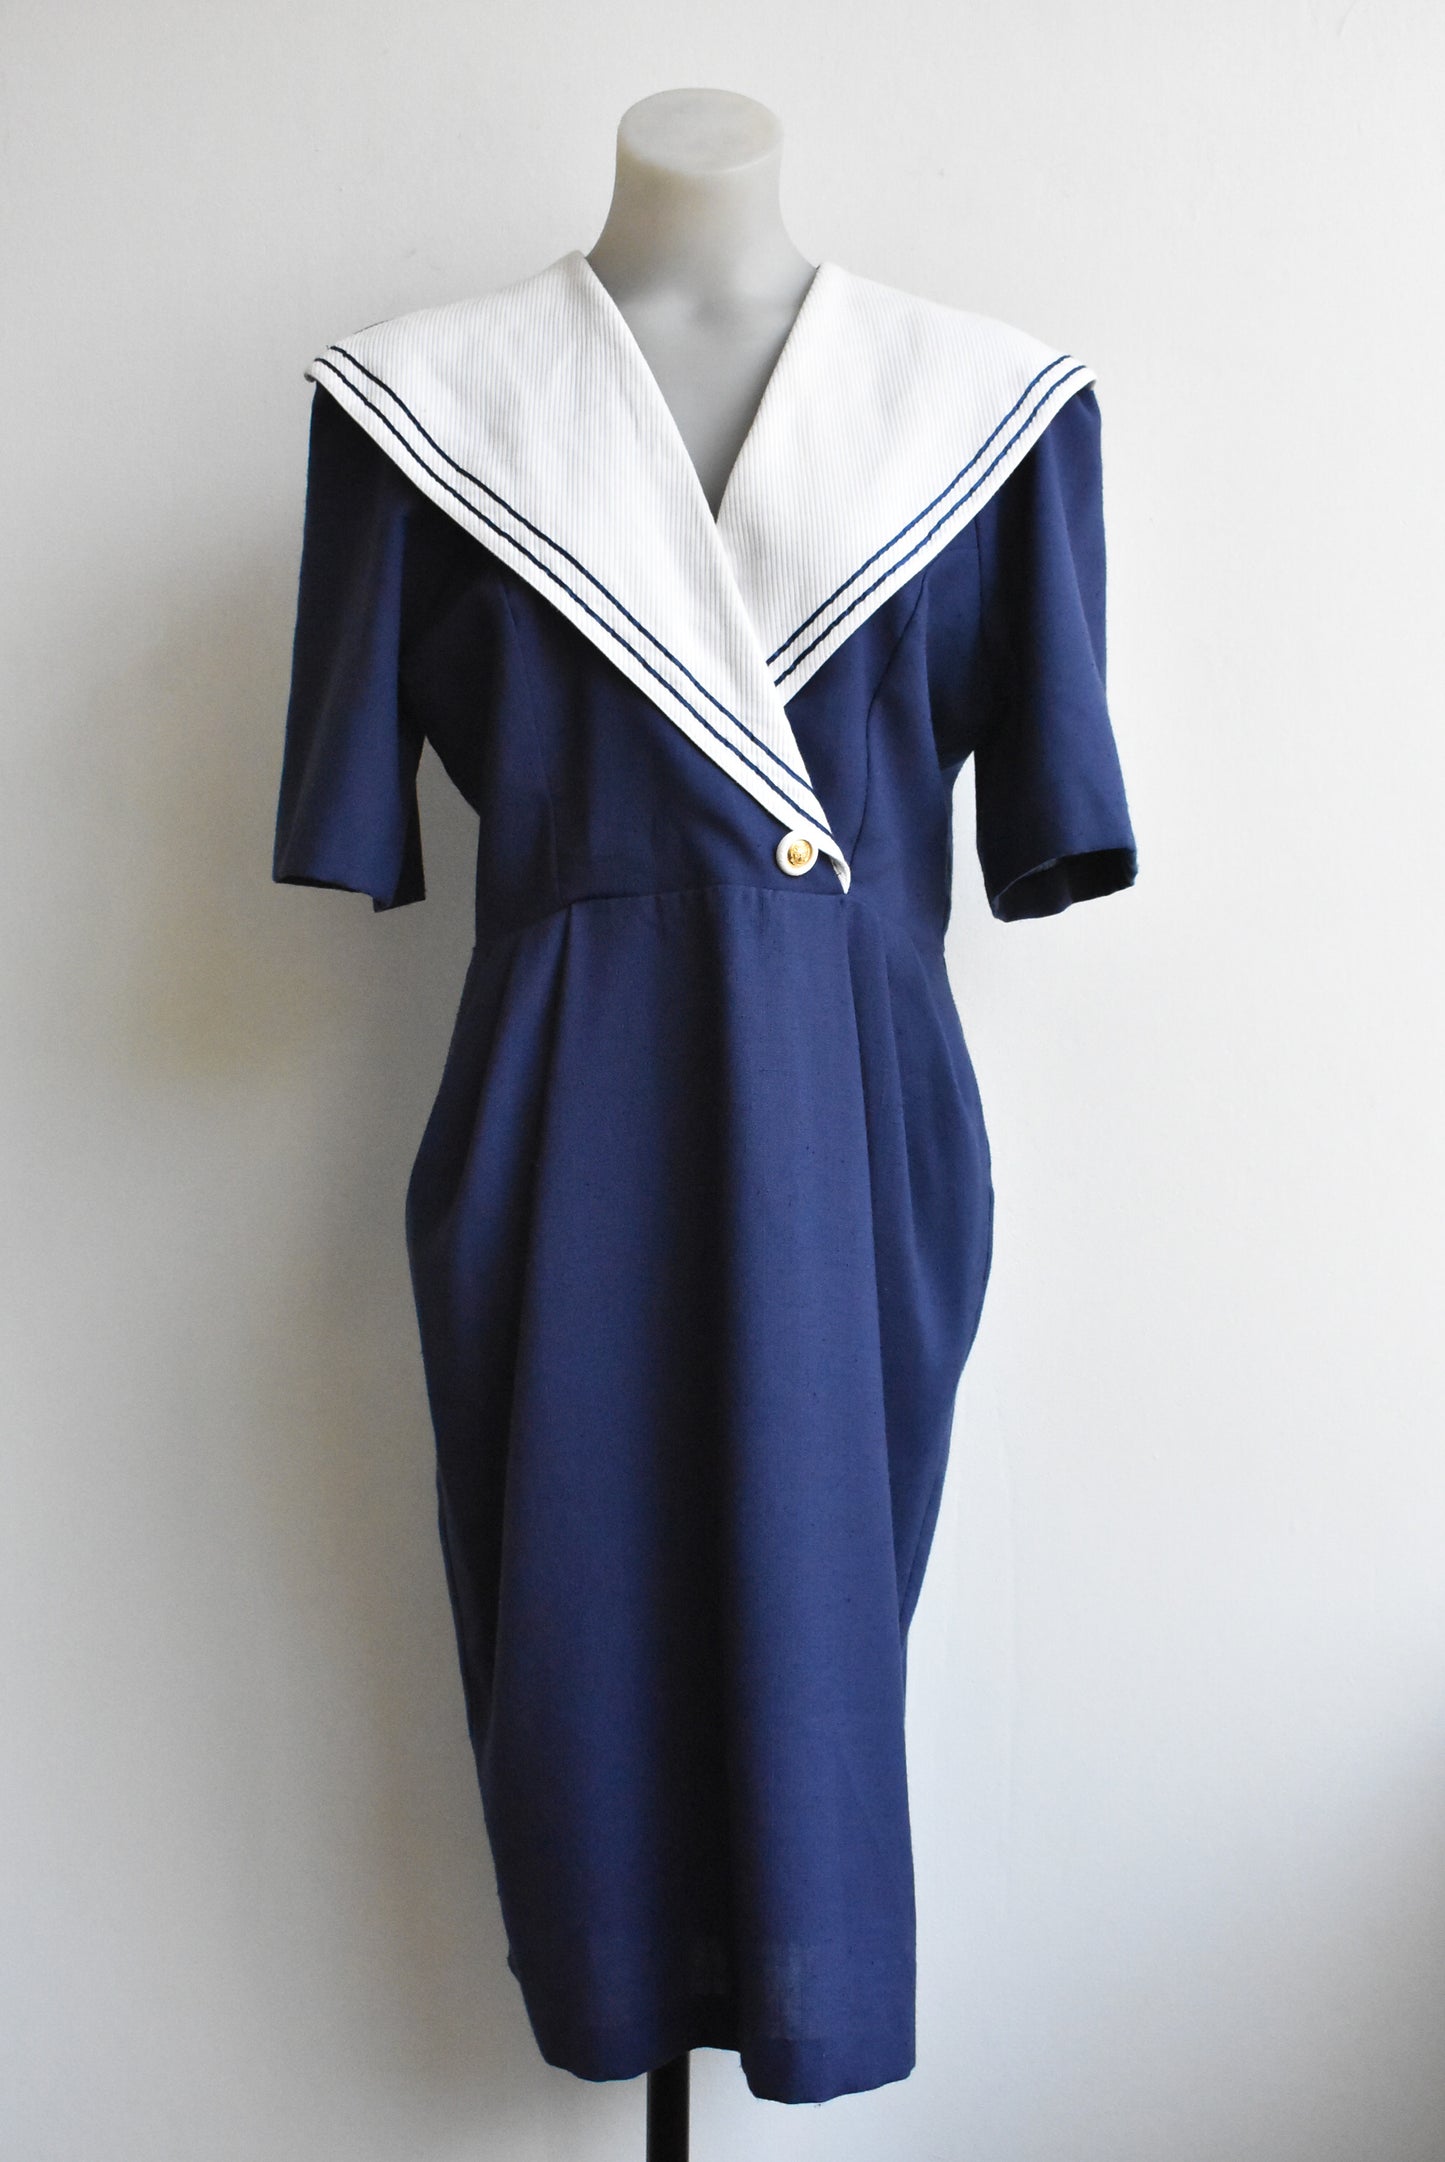 DS Dress, Made in New Zealand, size M